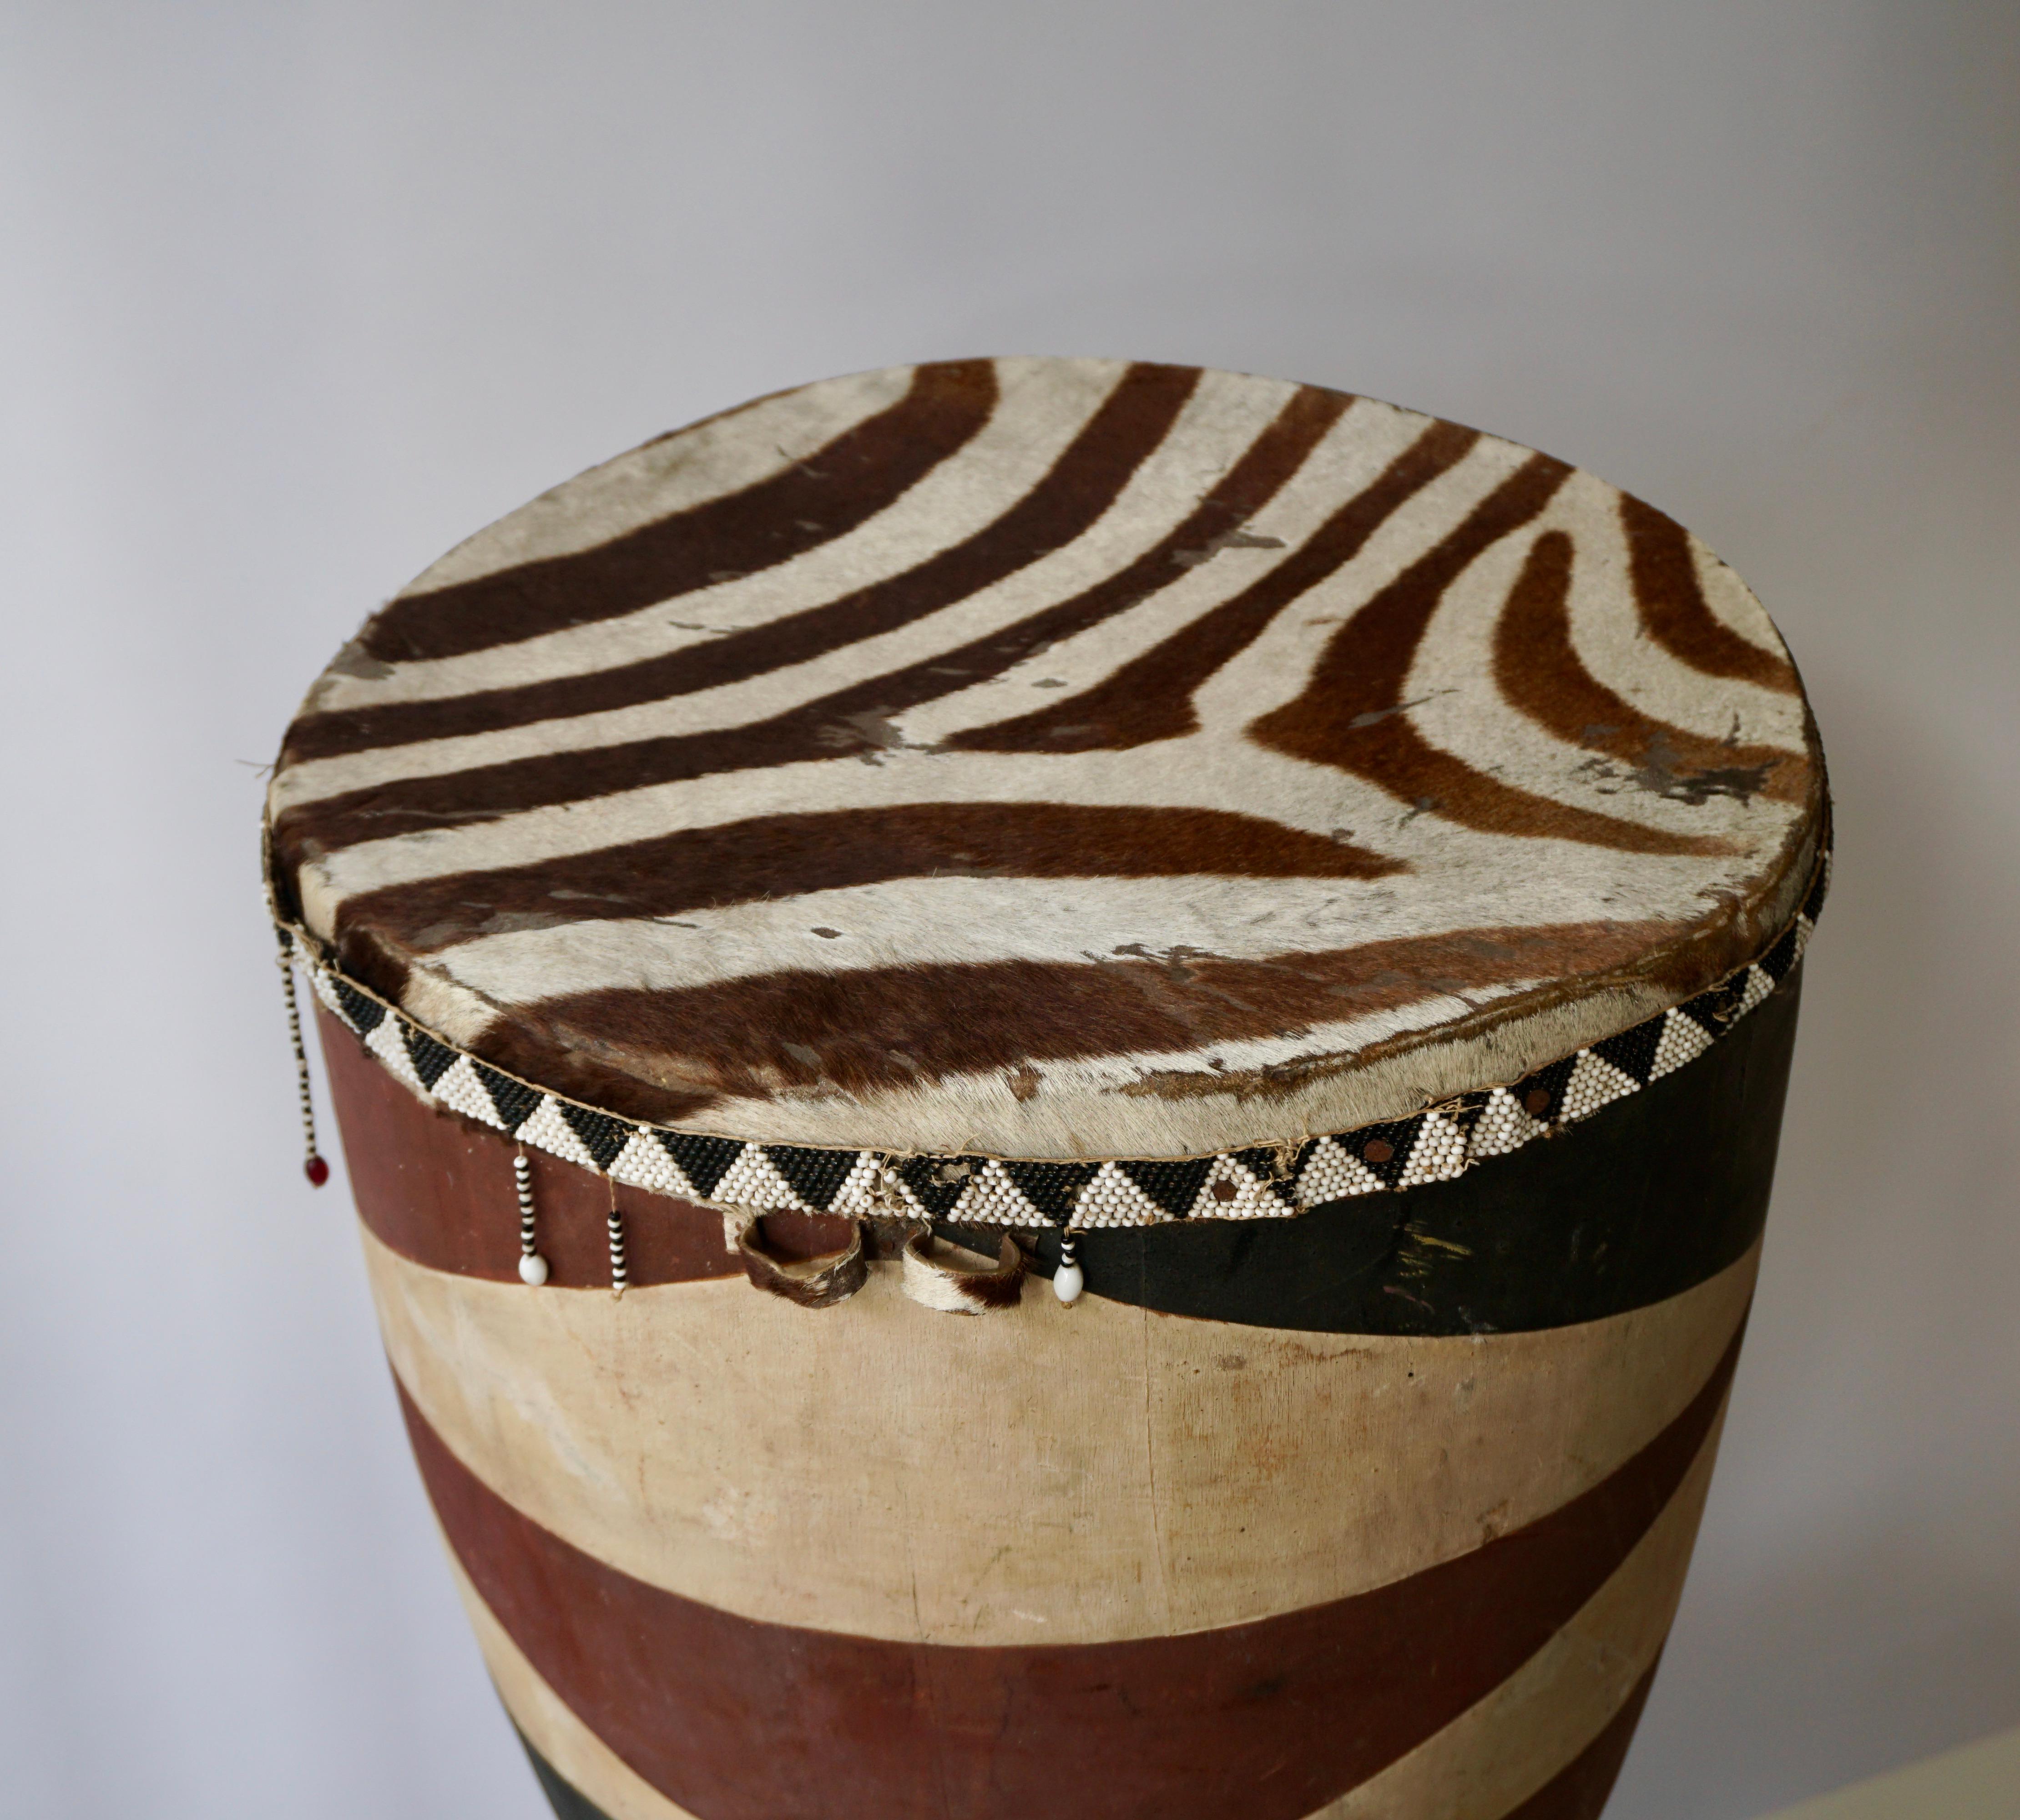 Hand-Painted African Tribal Painted Hide Drum Table with Zebra Covering from Congo